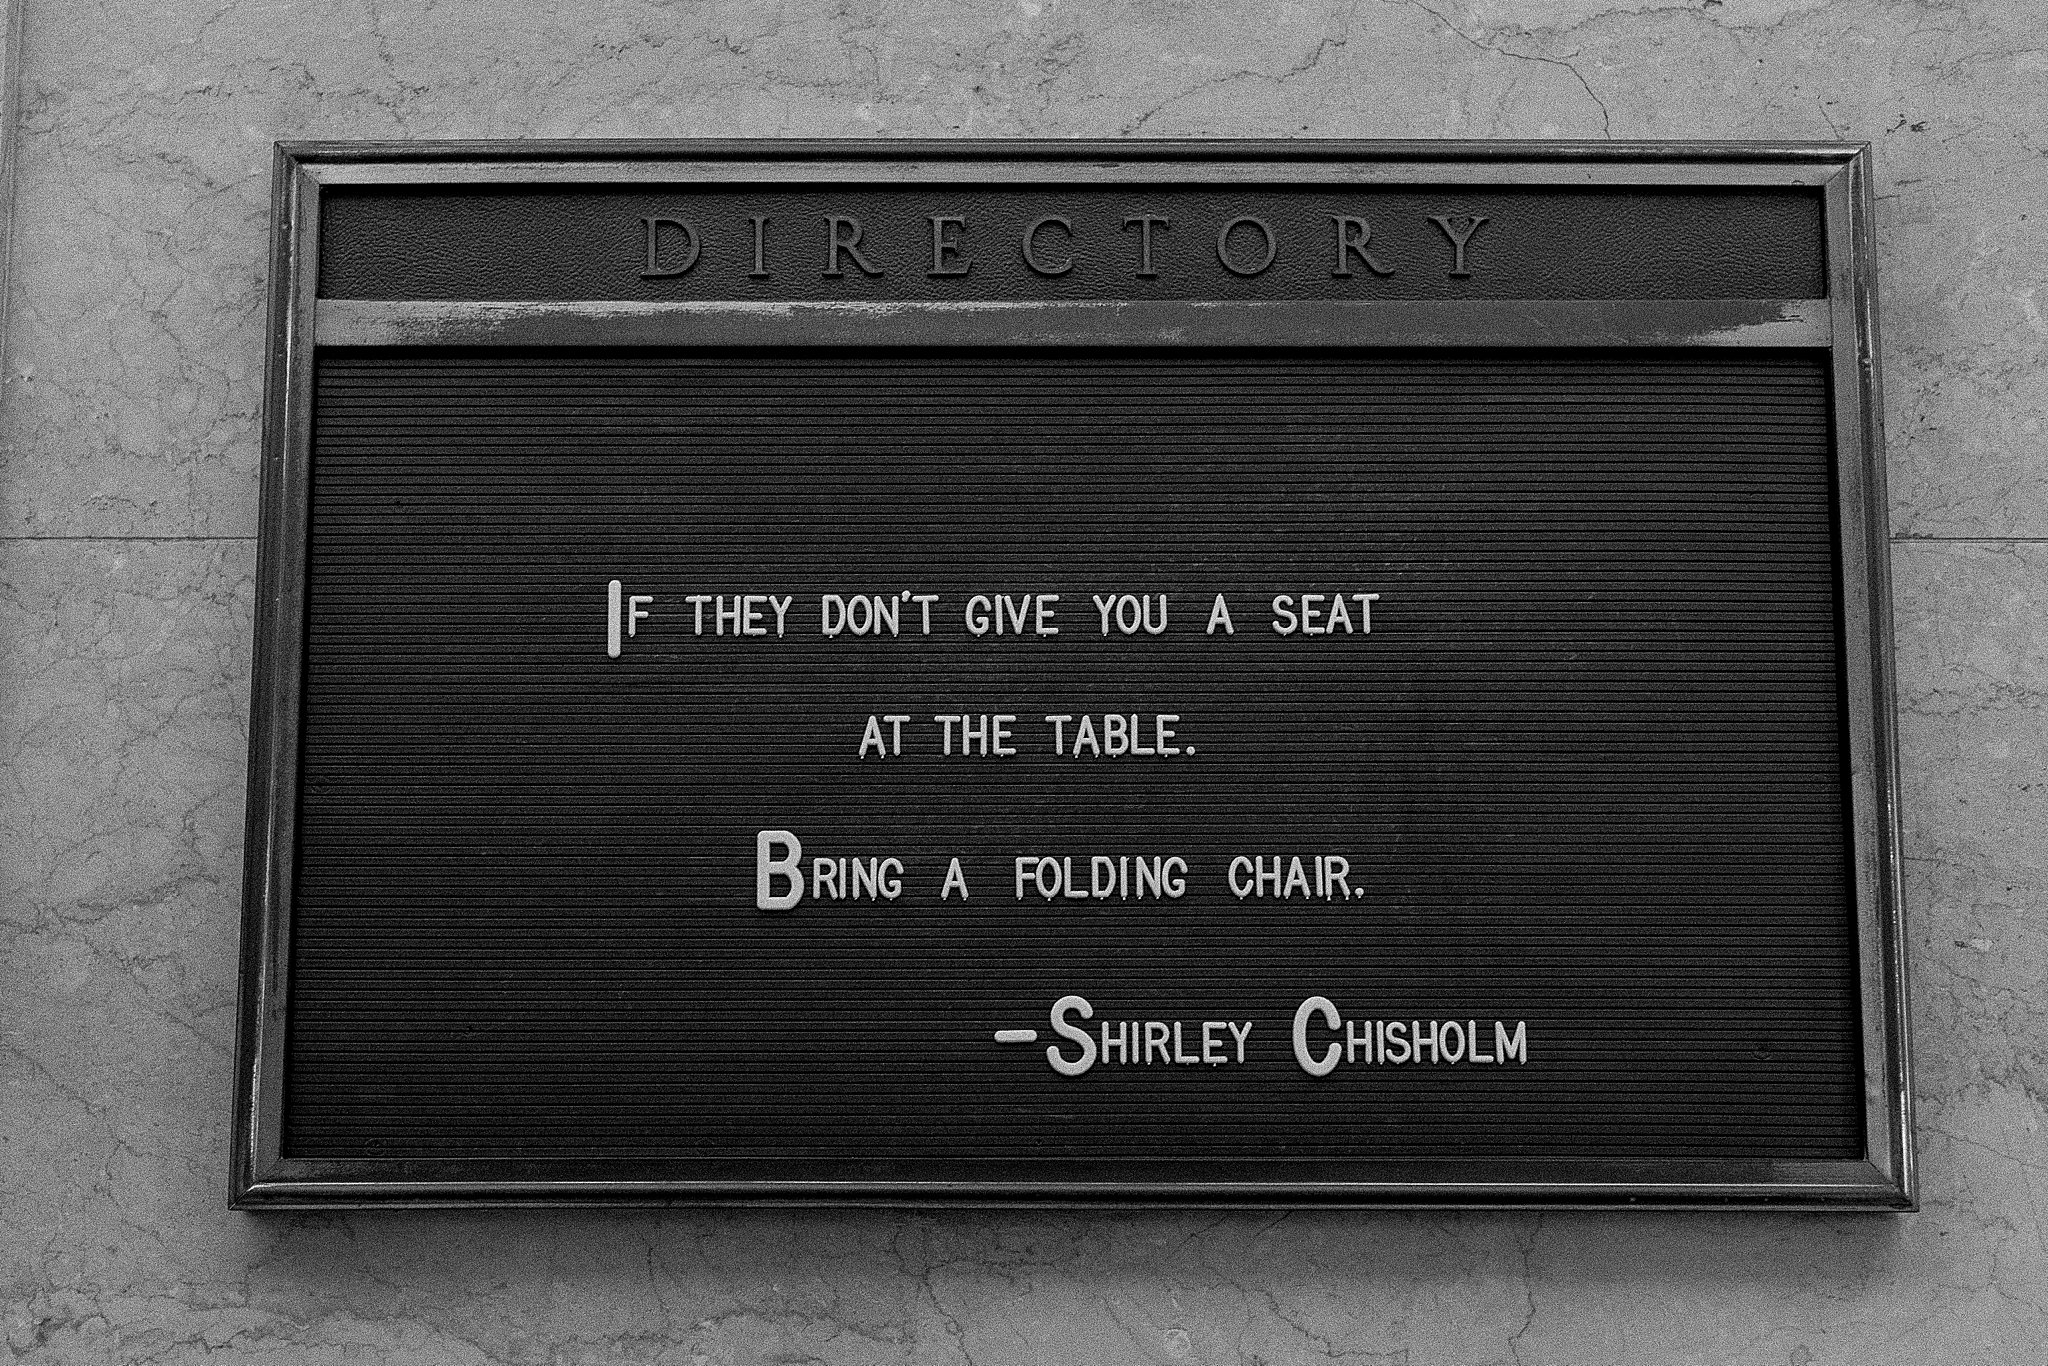 Shirley Chisholm quote at Riggs Hotel- If they don't give you a seat